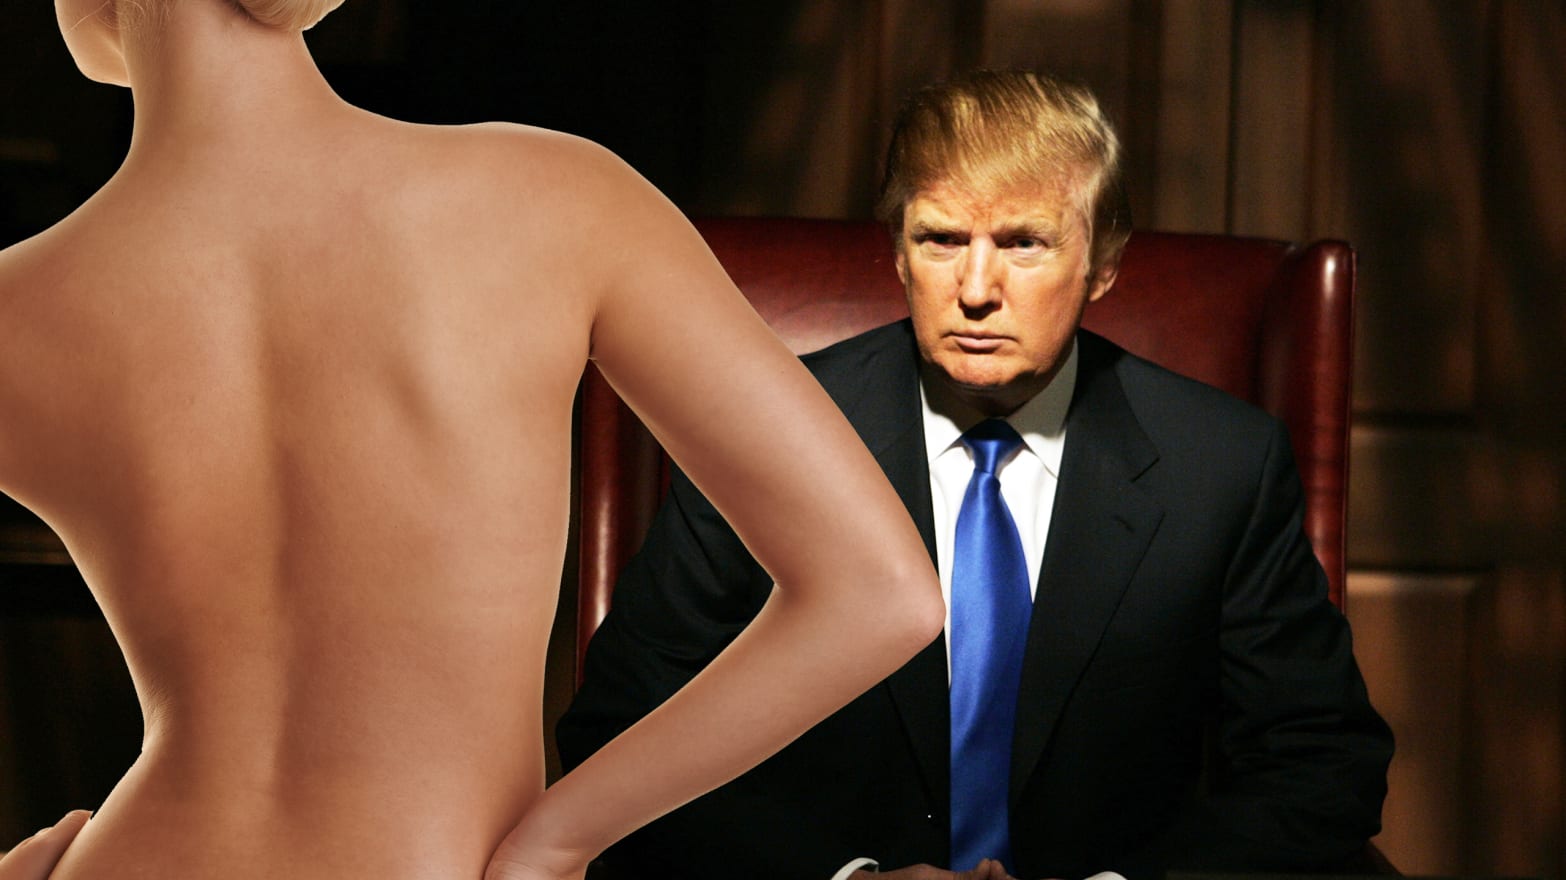 ayako toyoda recommends trump wife naked pics pic